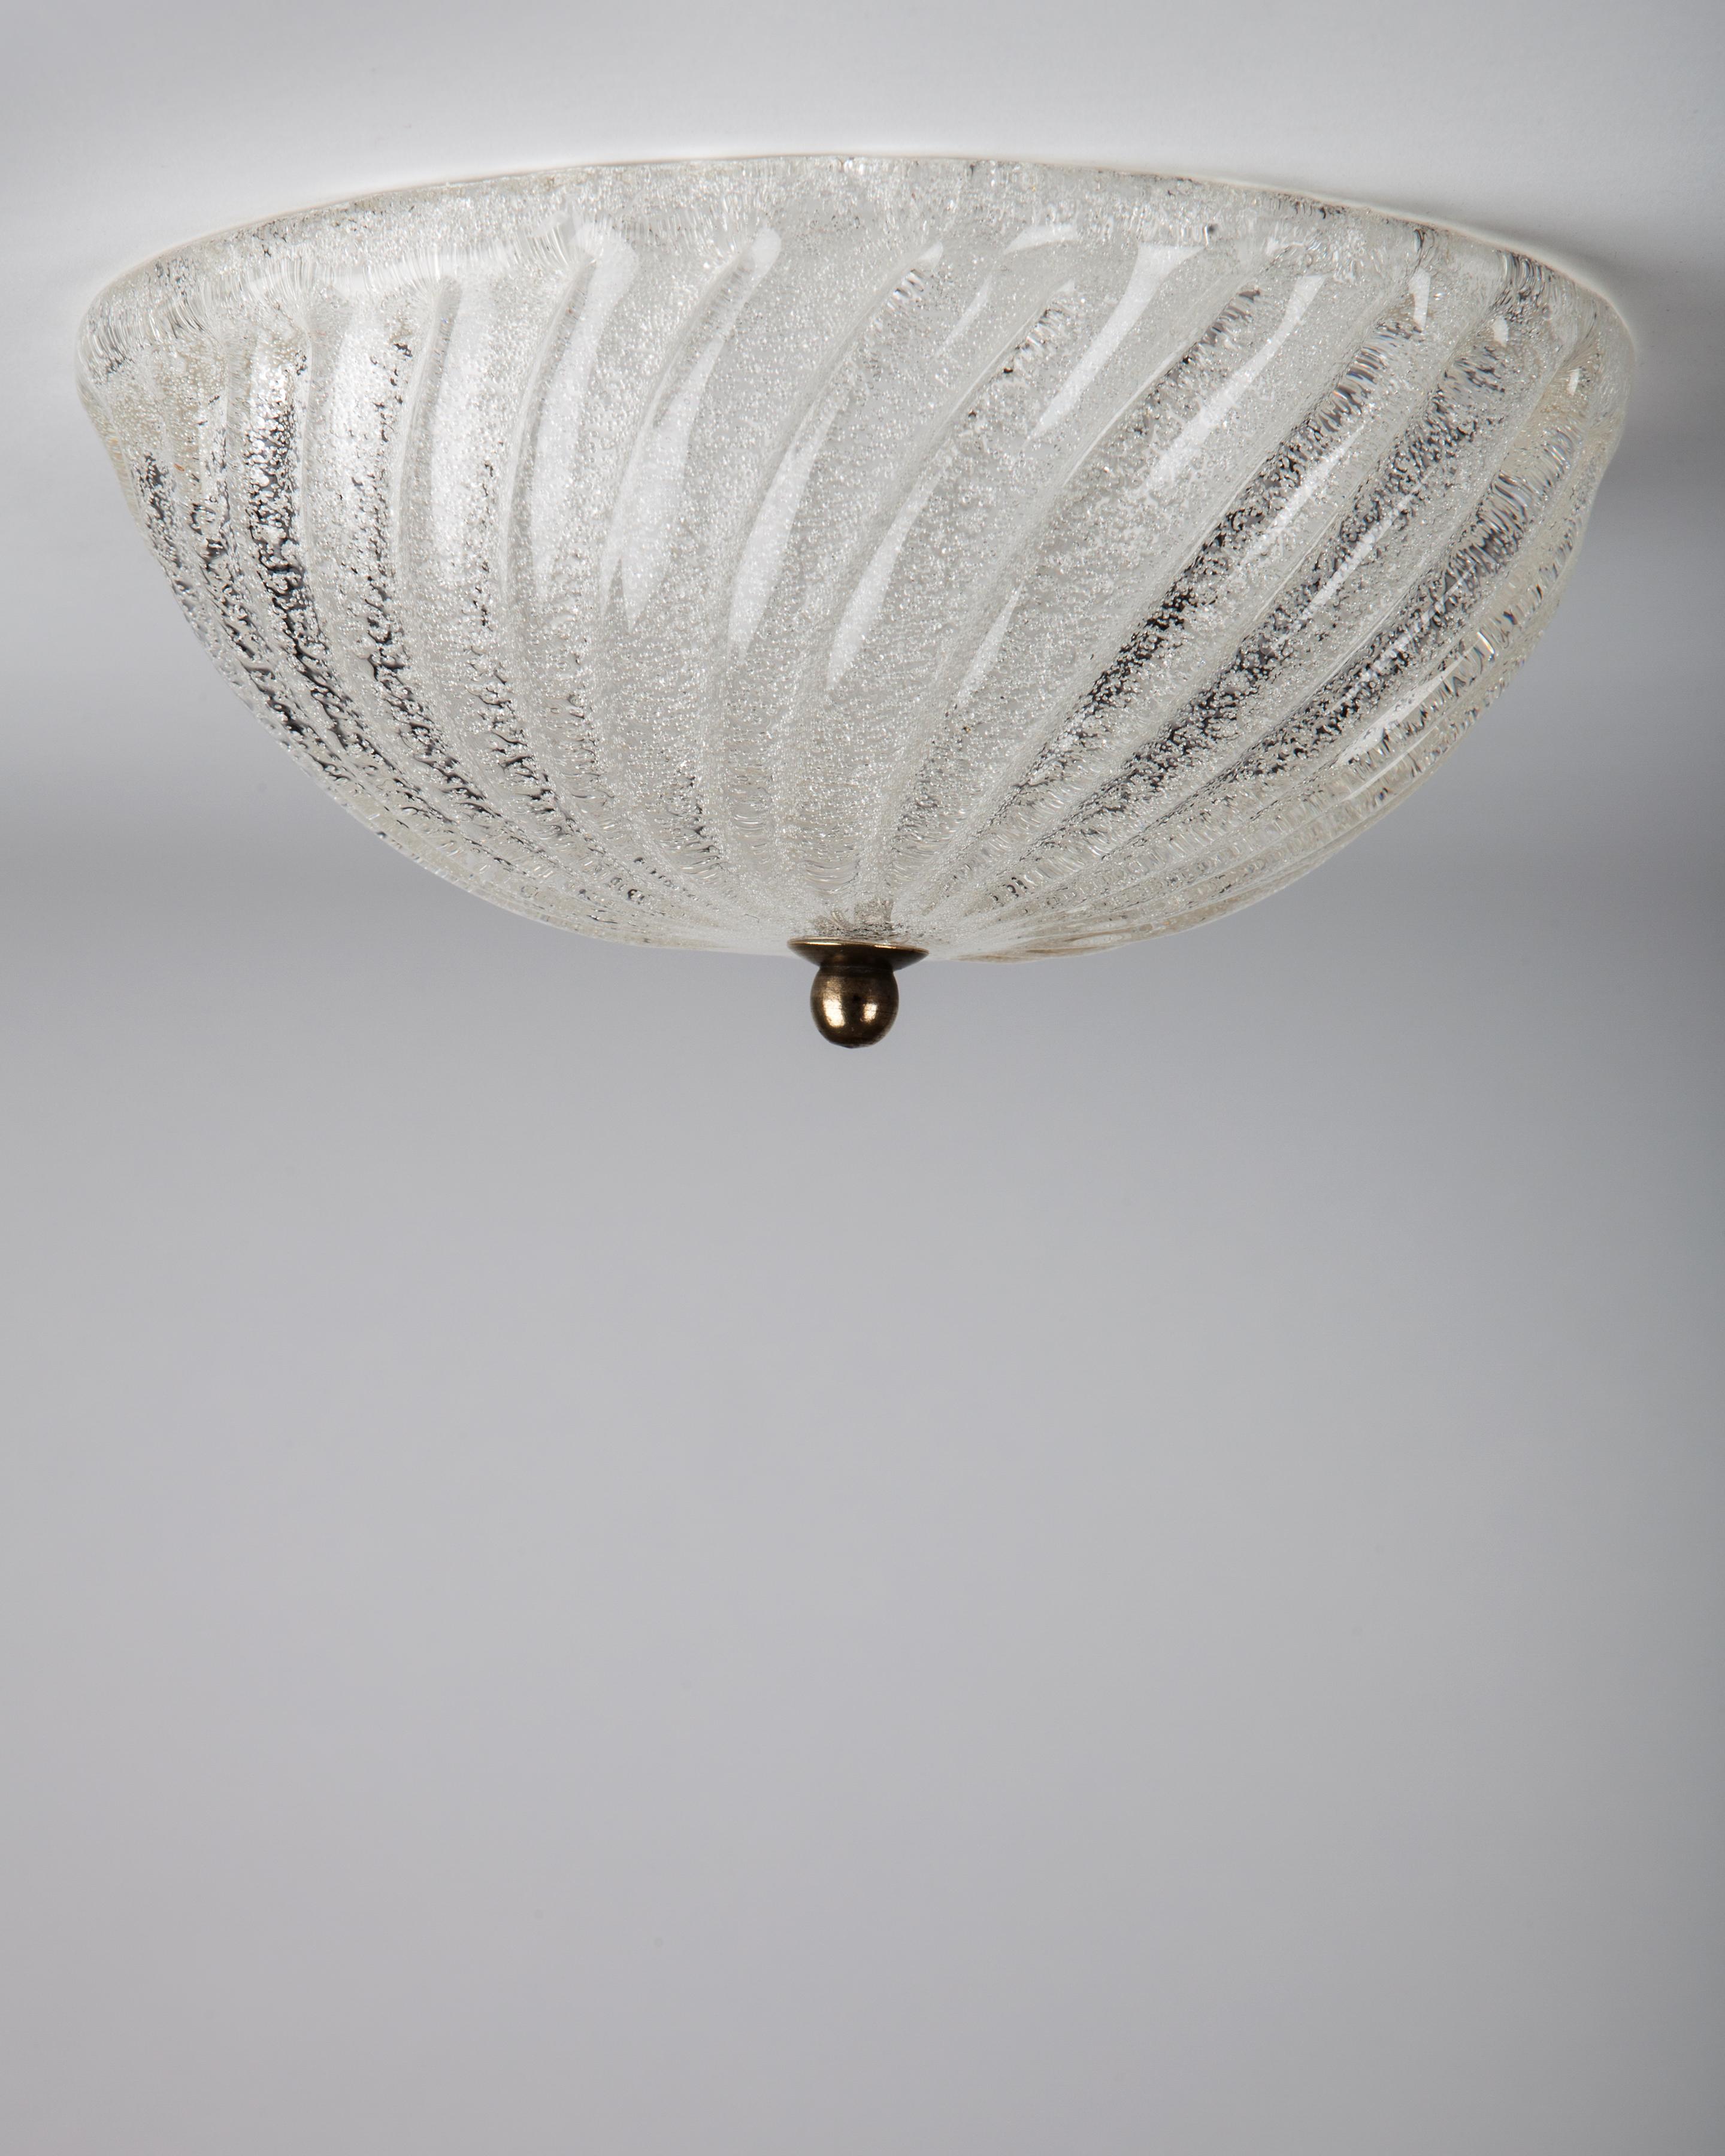 A vintage swirled and textured Murano glass dome flush mount with an aged brass finial. Due to the antique nature of this fixture, there may be some nicks or imperfections in the glass as well as variations from piece to piece, circa